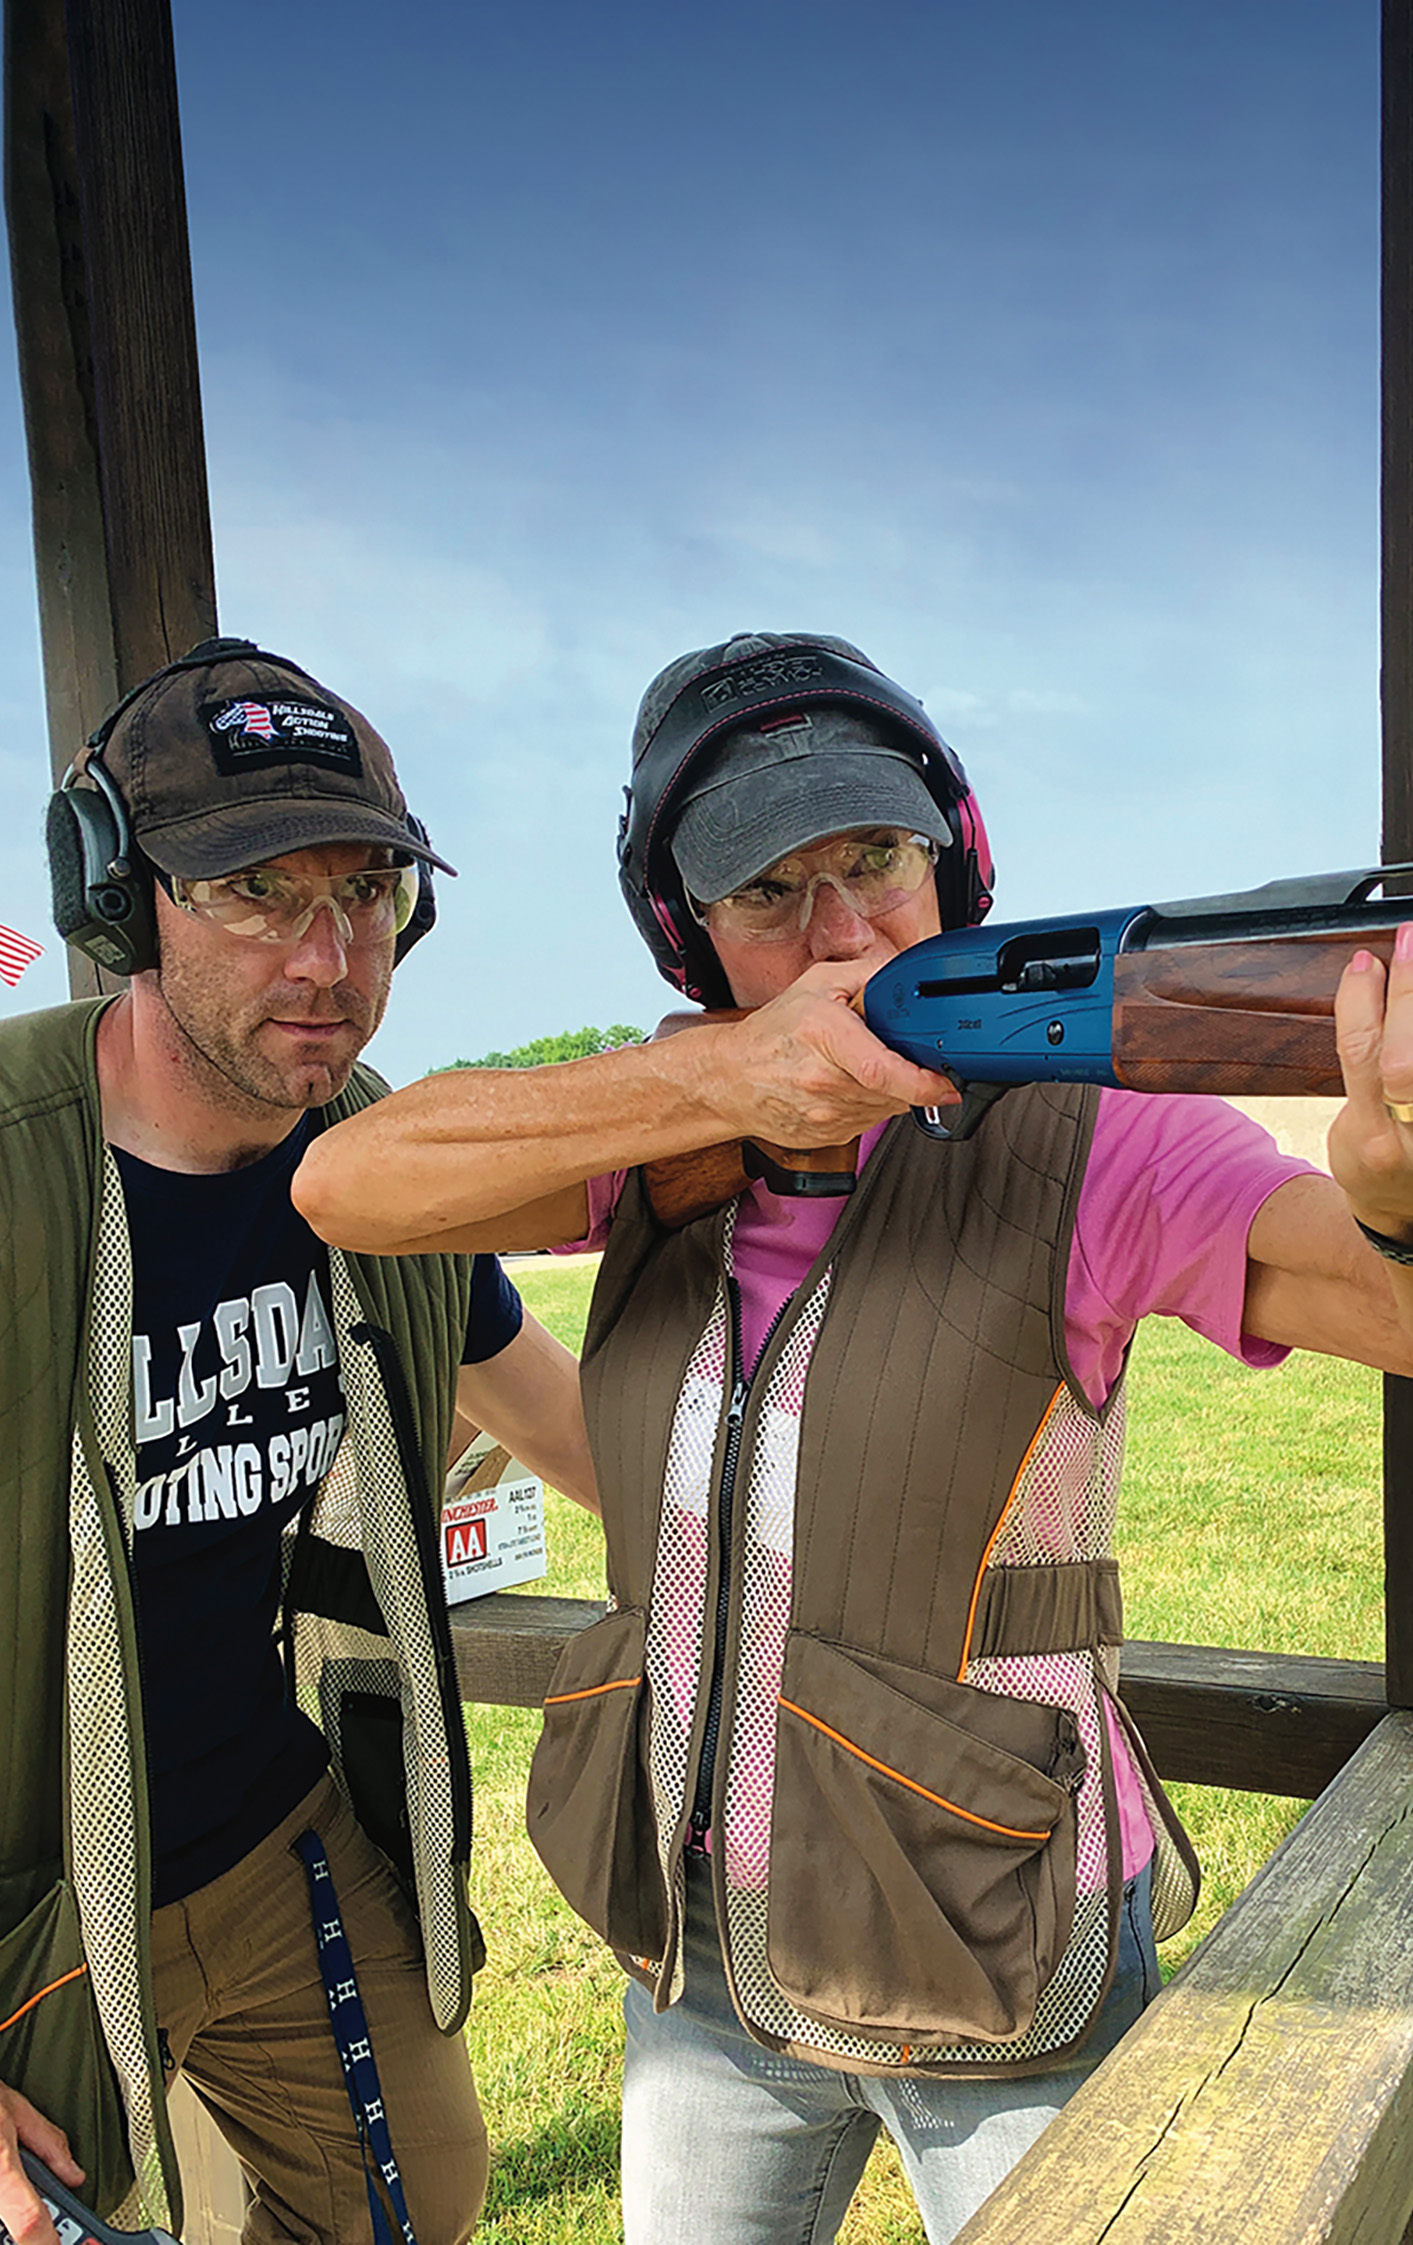 Female aiming a shotgun with a male instructor standing nearby.